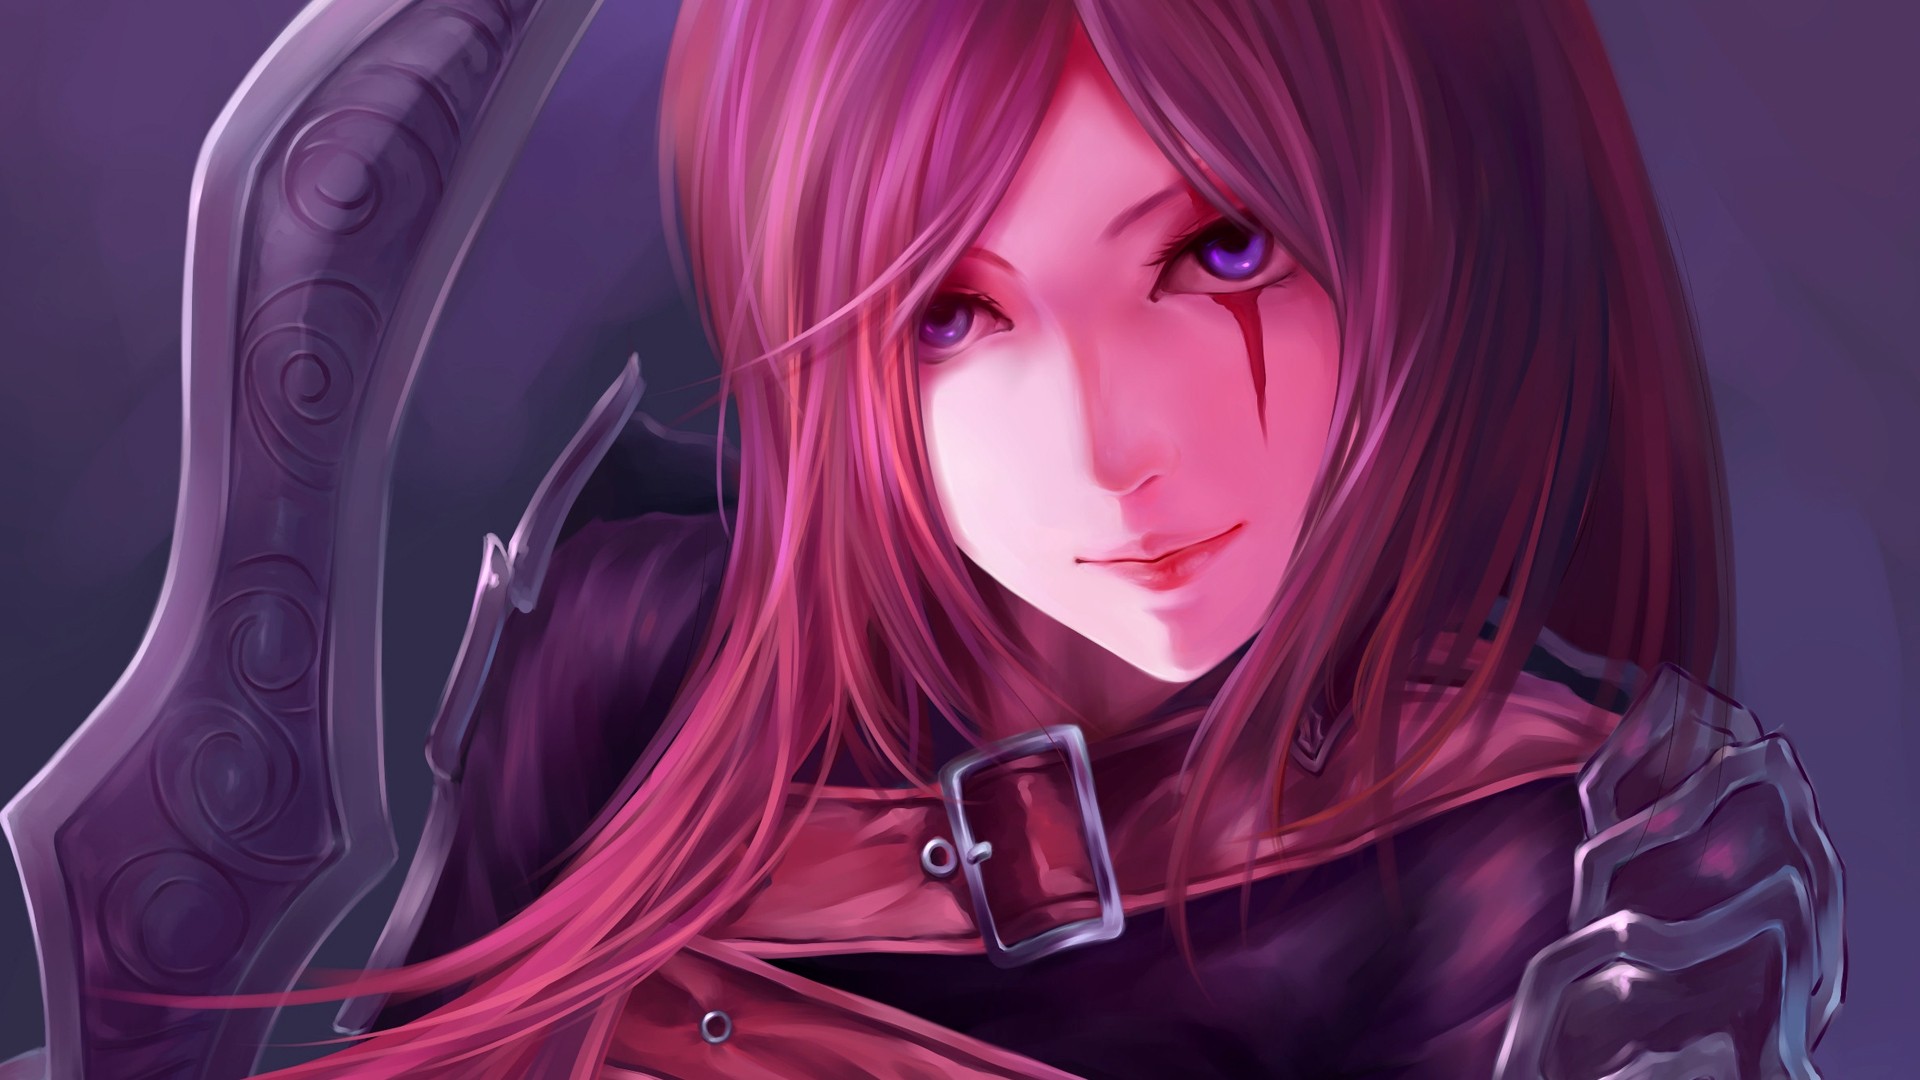 Anime 1920x1080 League of Legends video games redhead Katarina (League of Legends) PC gaming pink hair purple eyes face looking at viewer women long hair video game art video game girls fantasy art women with swords sword weapon fantasy girl